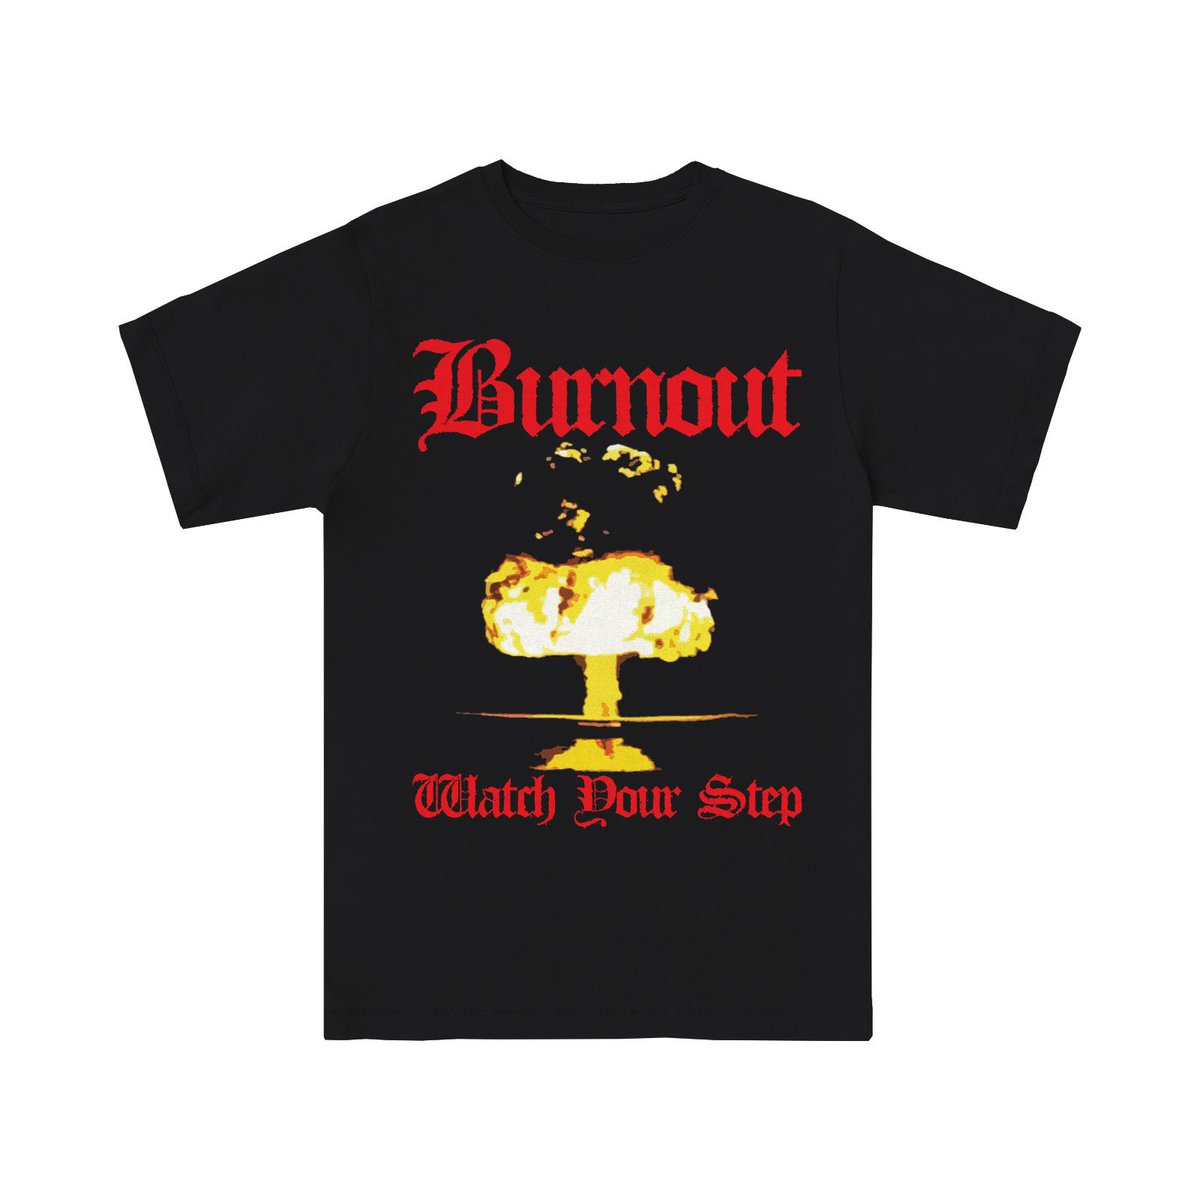 BURNOUT “WATCH YOUR STEP” CROMAGS PARODY RM60 OPEN FOR PREORDER  CONTACT 011-25612703 TO ORDER